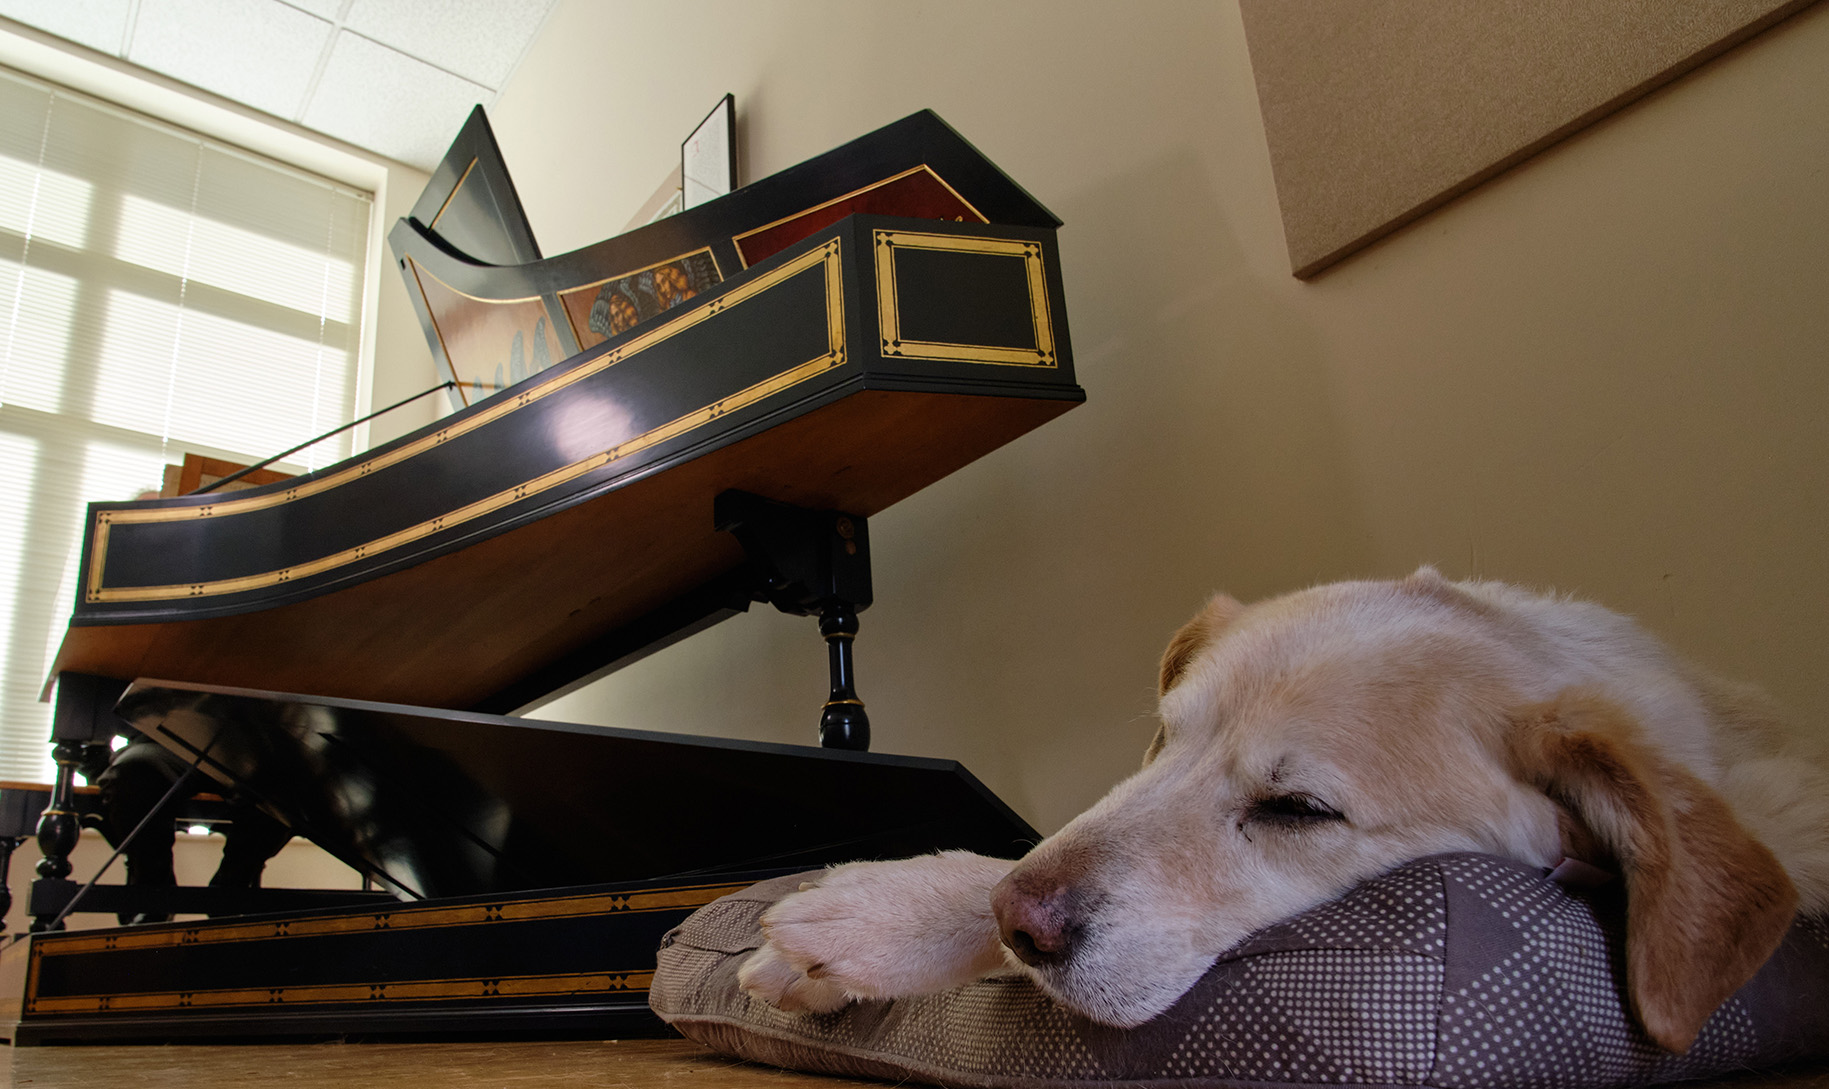 Dr. Tegels' dog, Marley, rests on his bed while Dr. Tegels plays the harpsichord.